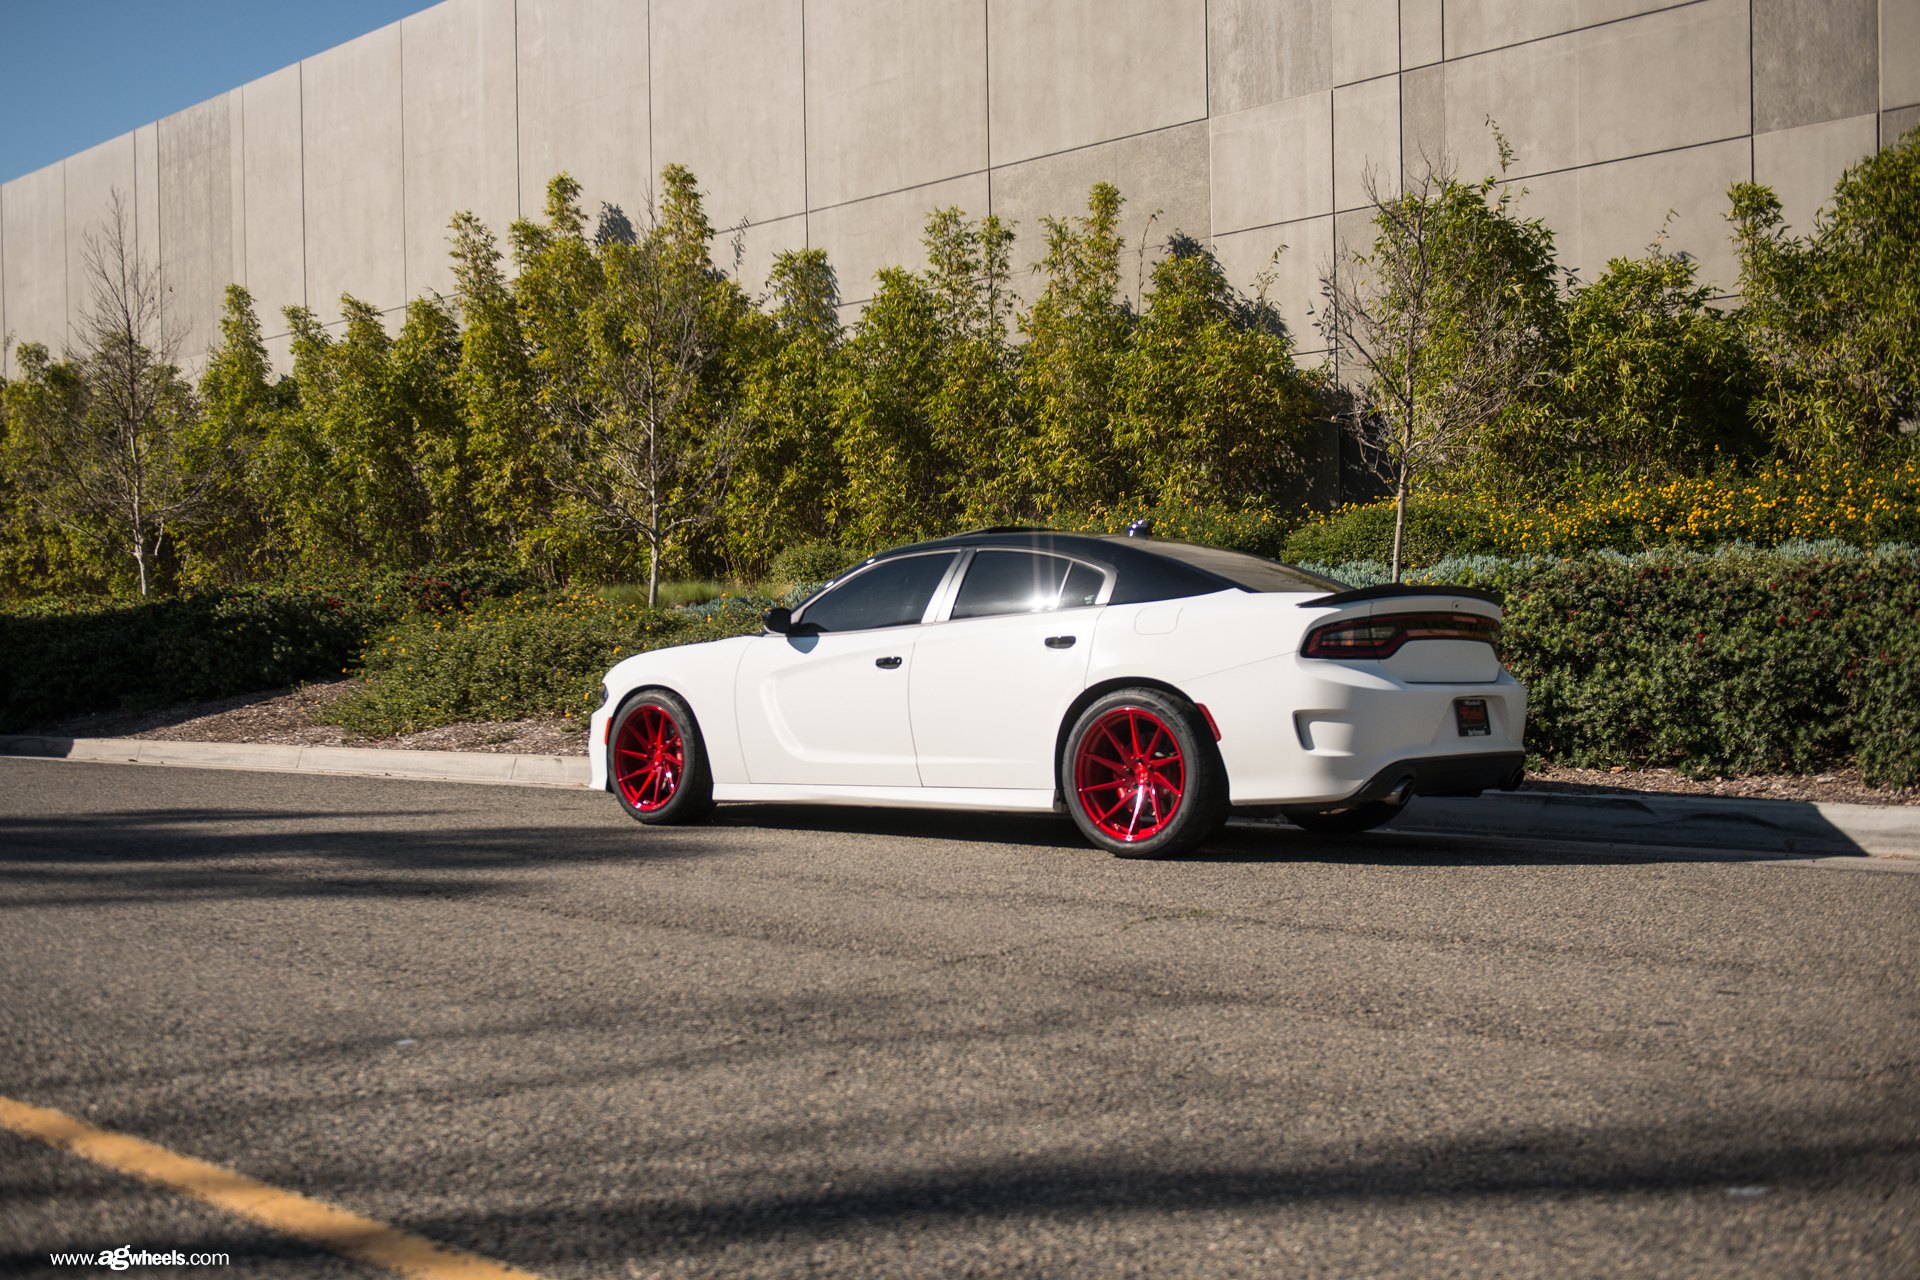 White Dodge Charger with Aftermarket Rear Spoiler - Photo by Avant Garde Wheels